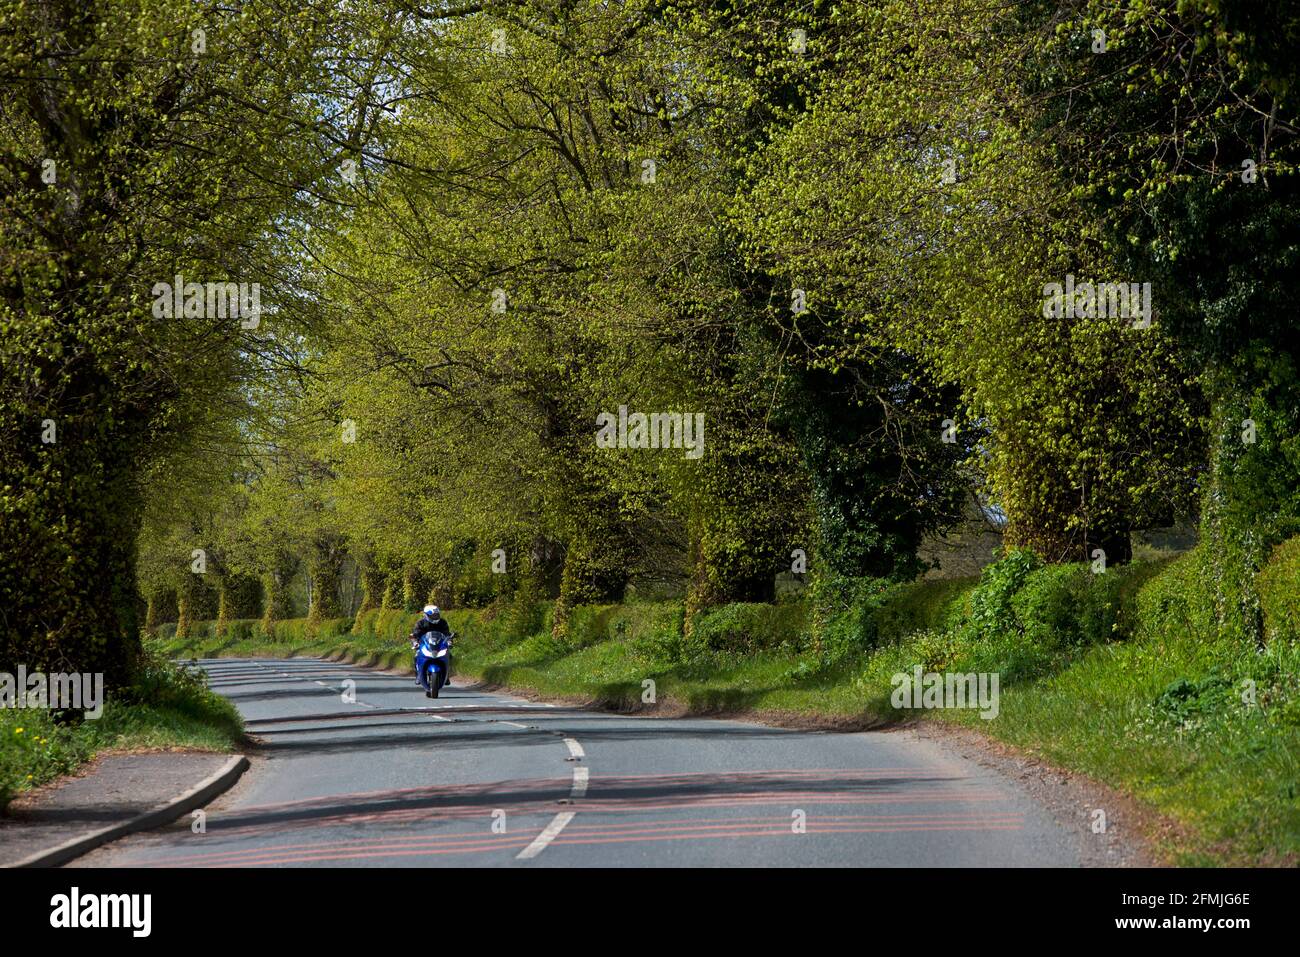 Motor bike on road lined with trees and hedges, near Ulleskelf, North Yorkshire, England UK Stock Photo